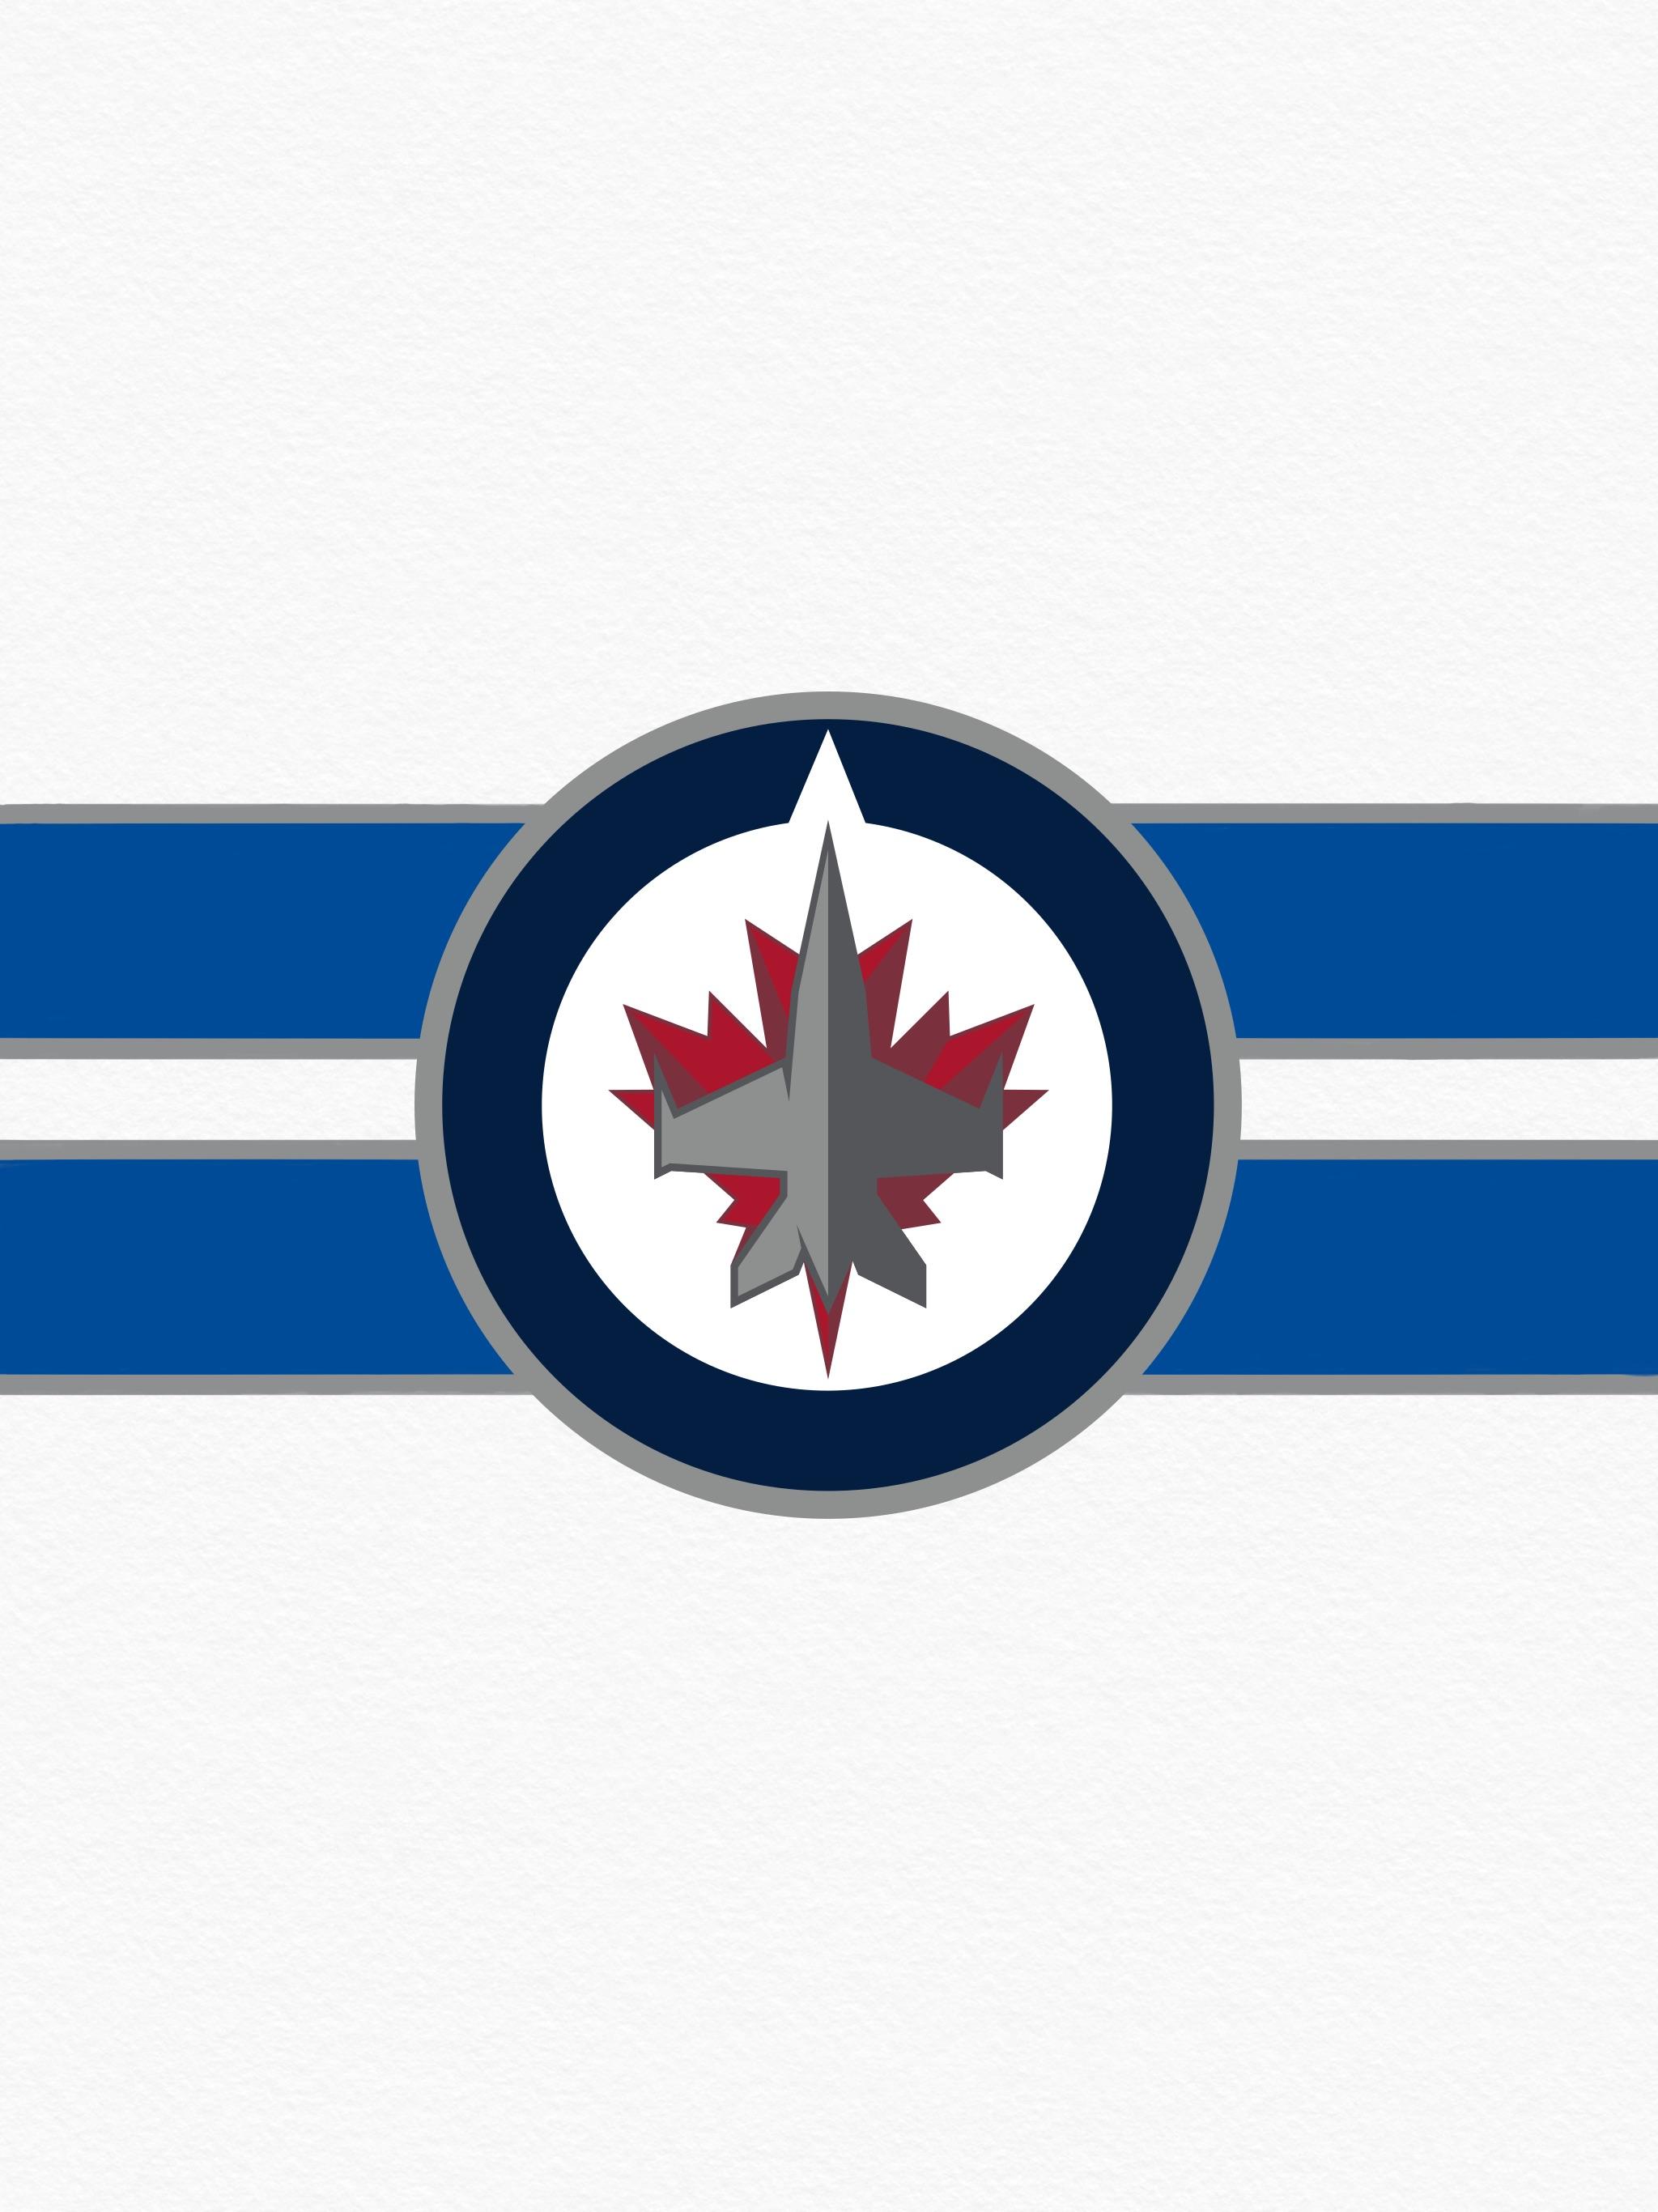 Made a whiteout wallpaper, figured I'd share it. GO JETS GO